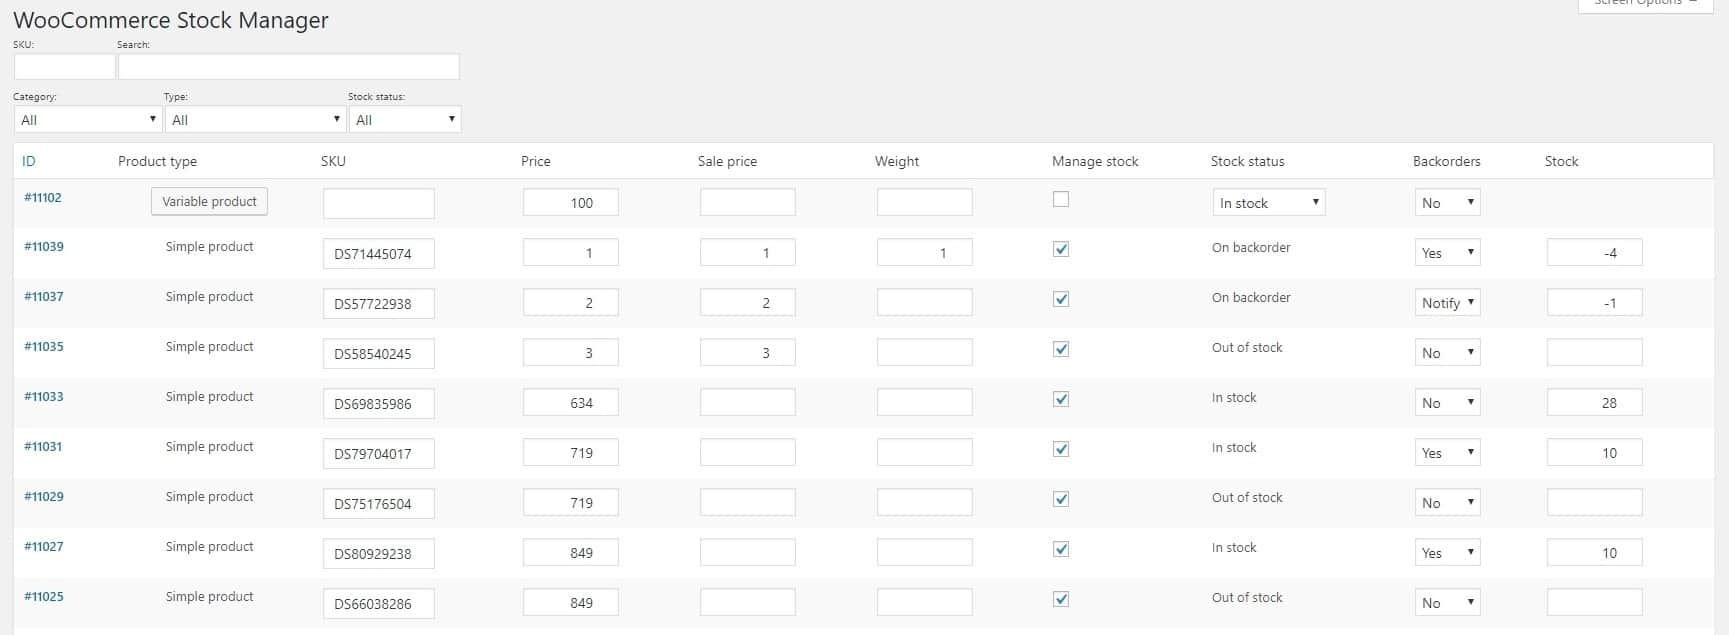 WooCommerce Stock Manager dashboard